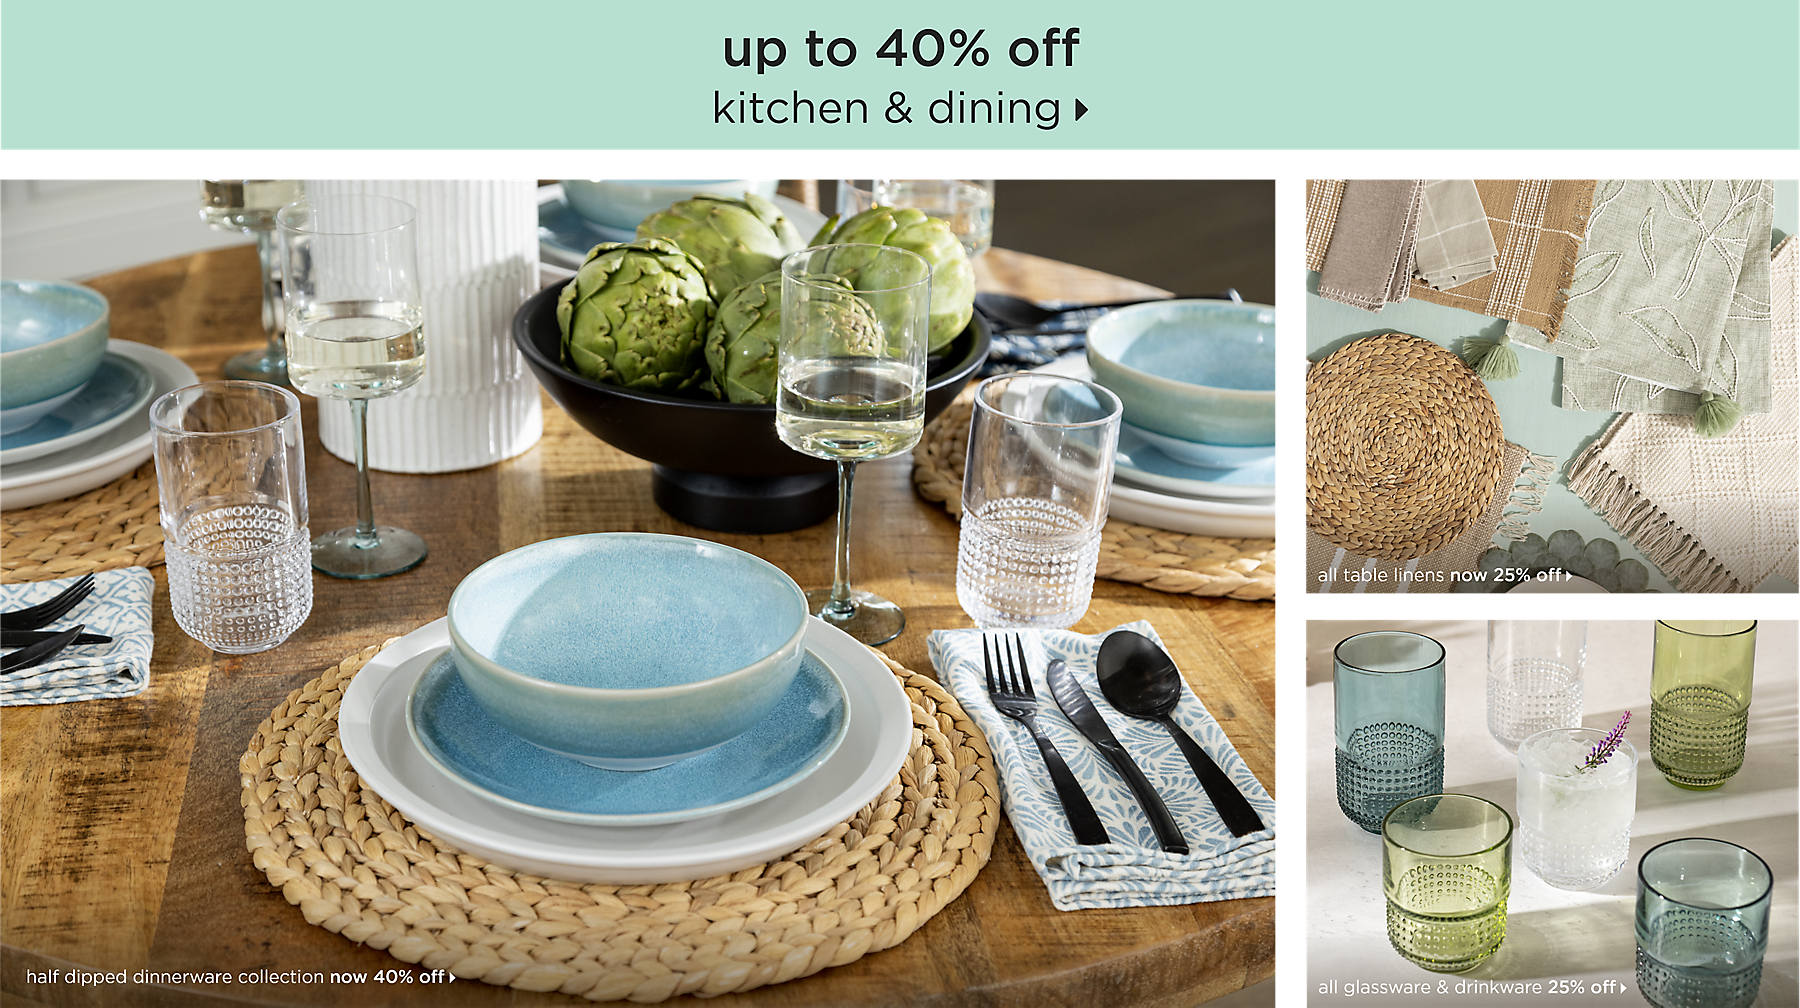 kitchen & dining up to 40% off shop now half dipped dinnerware collection now 40% off all table linens 25% off all glassware & drinkware 25% off